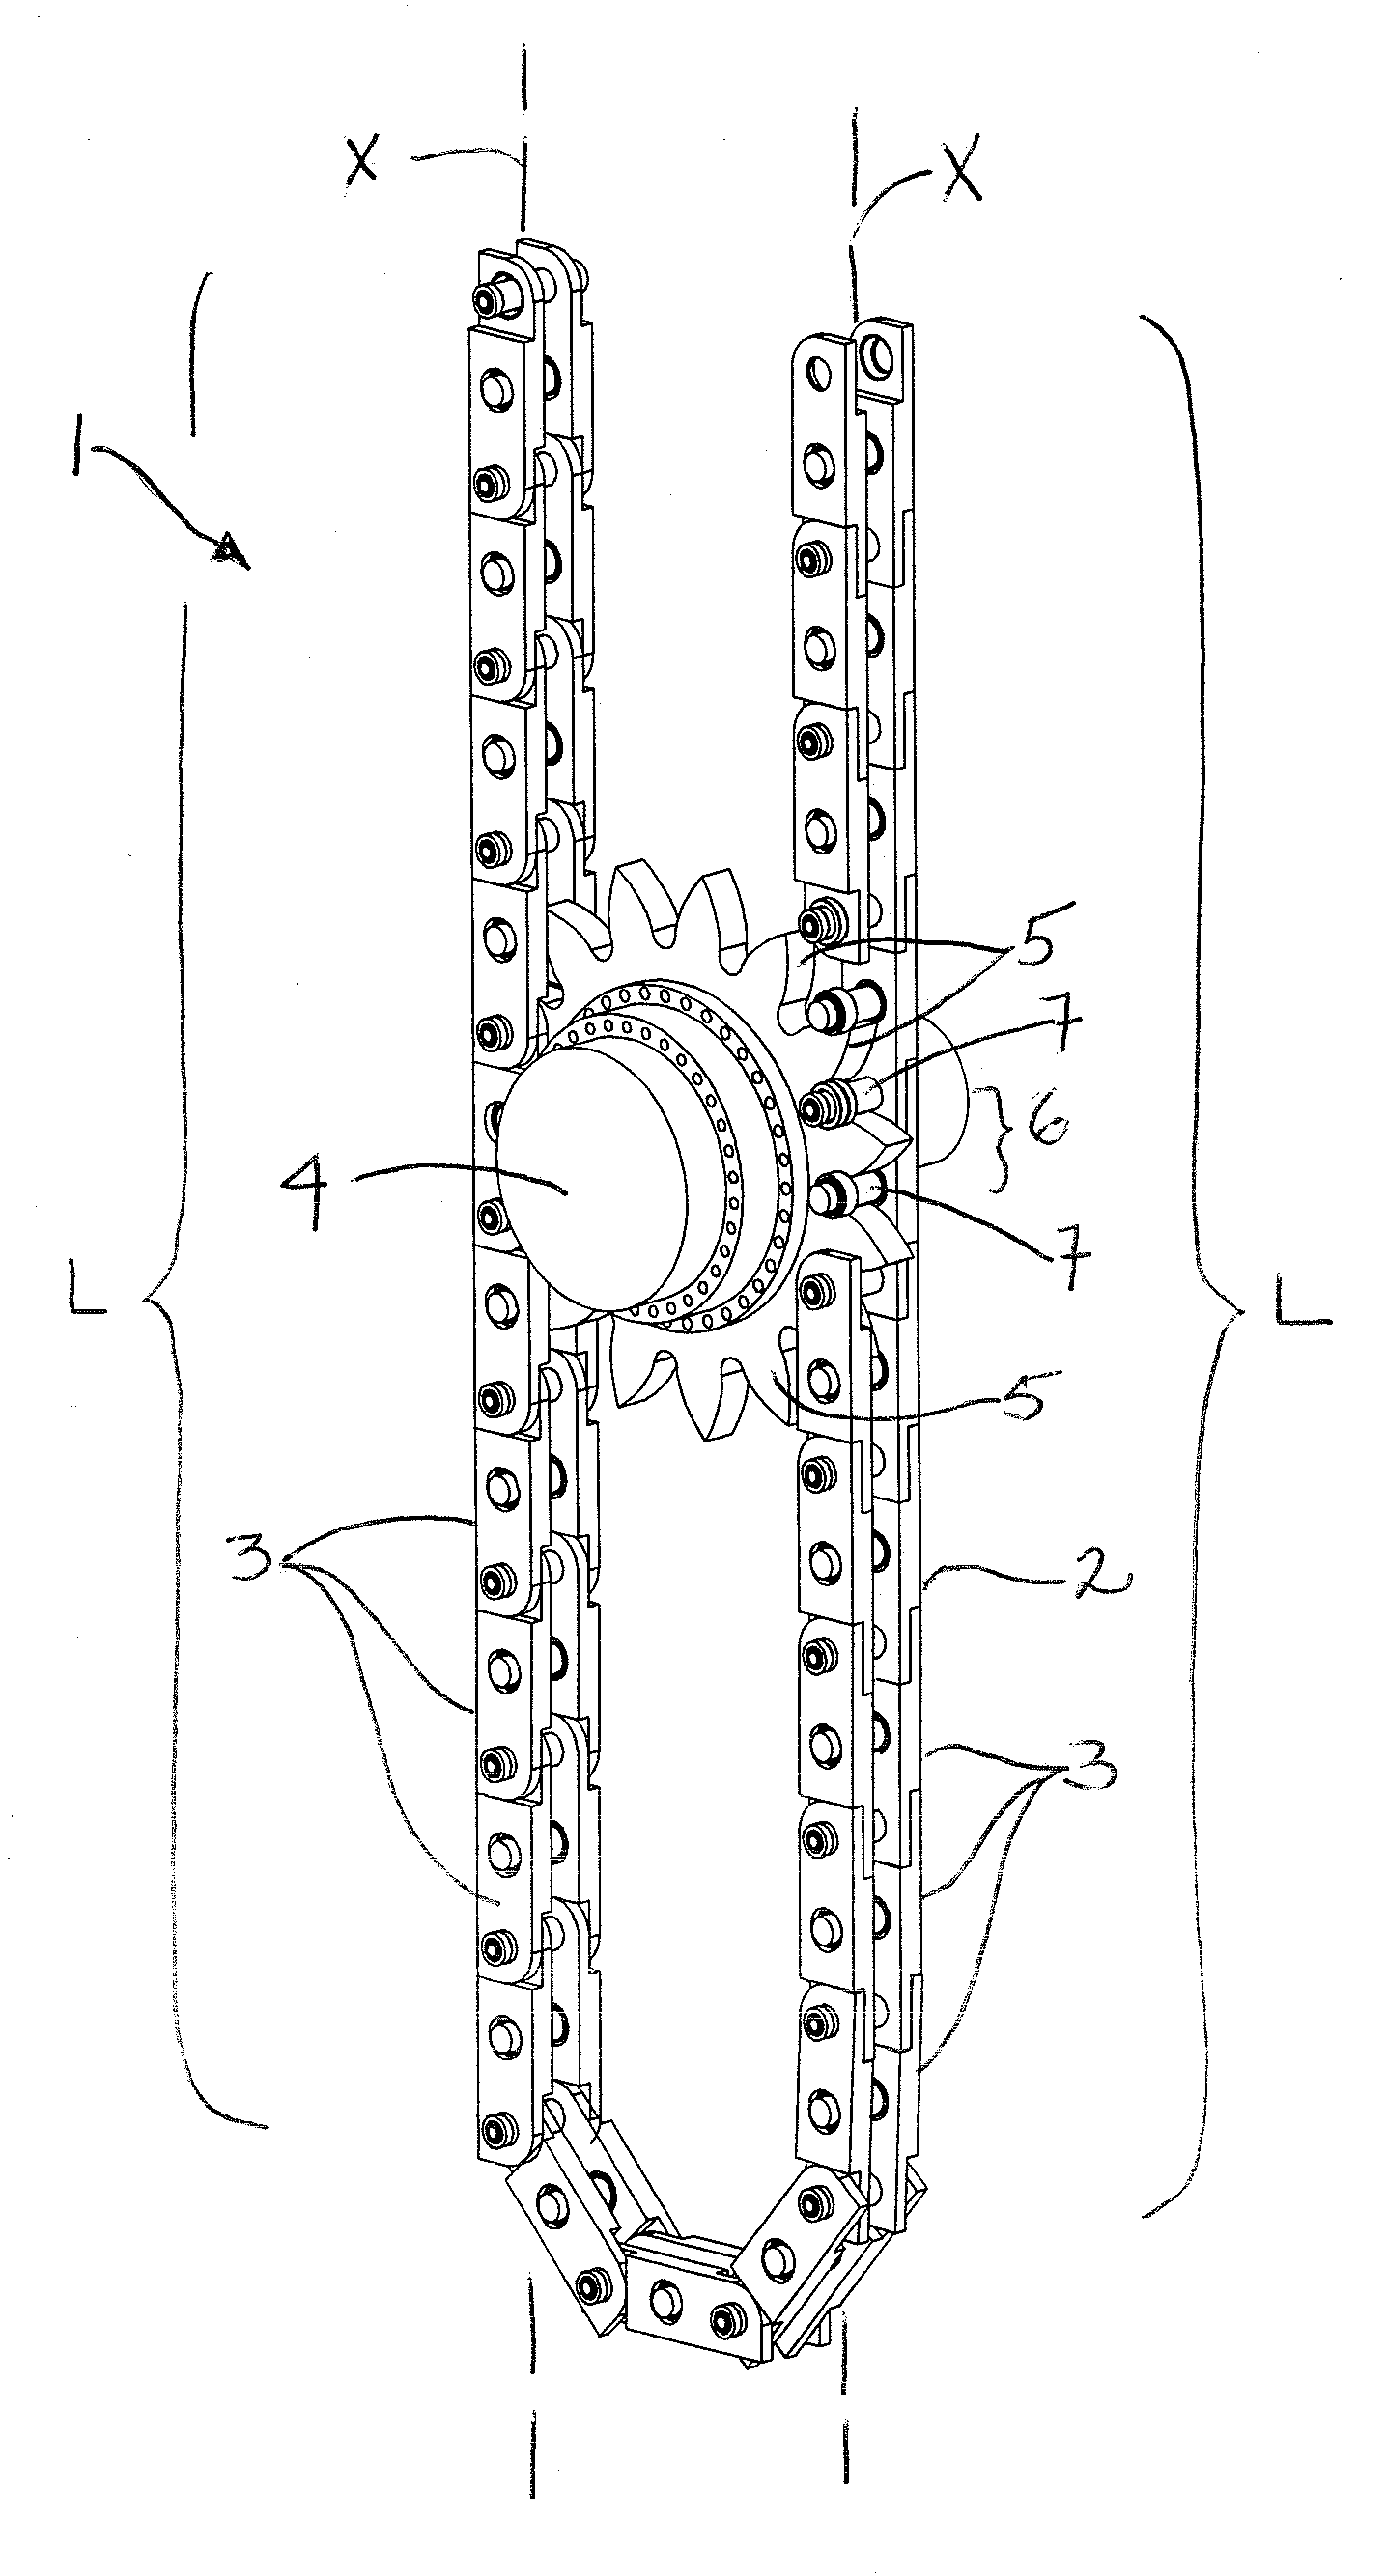 Roller chain and sprocket system